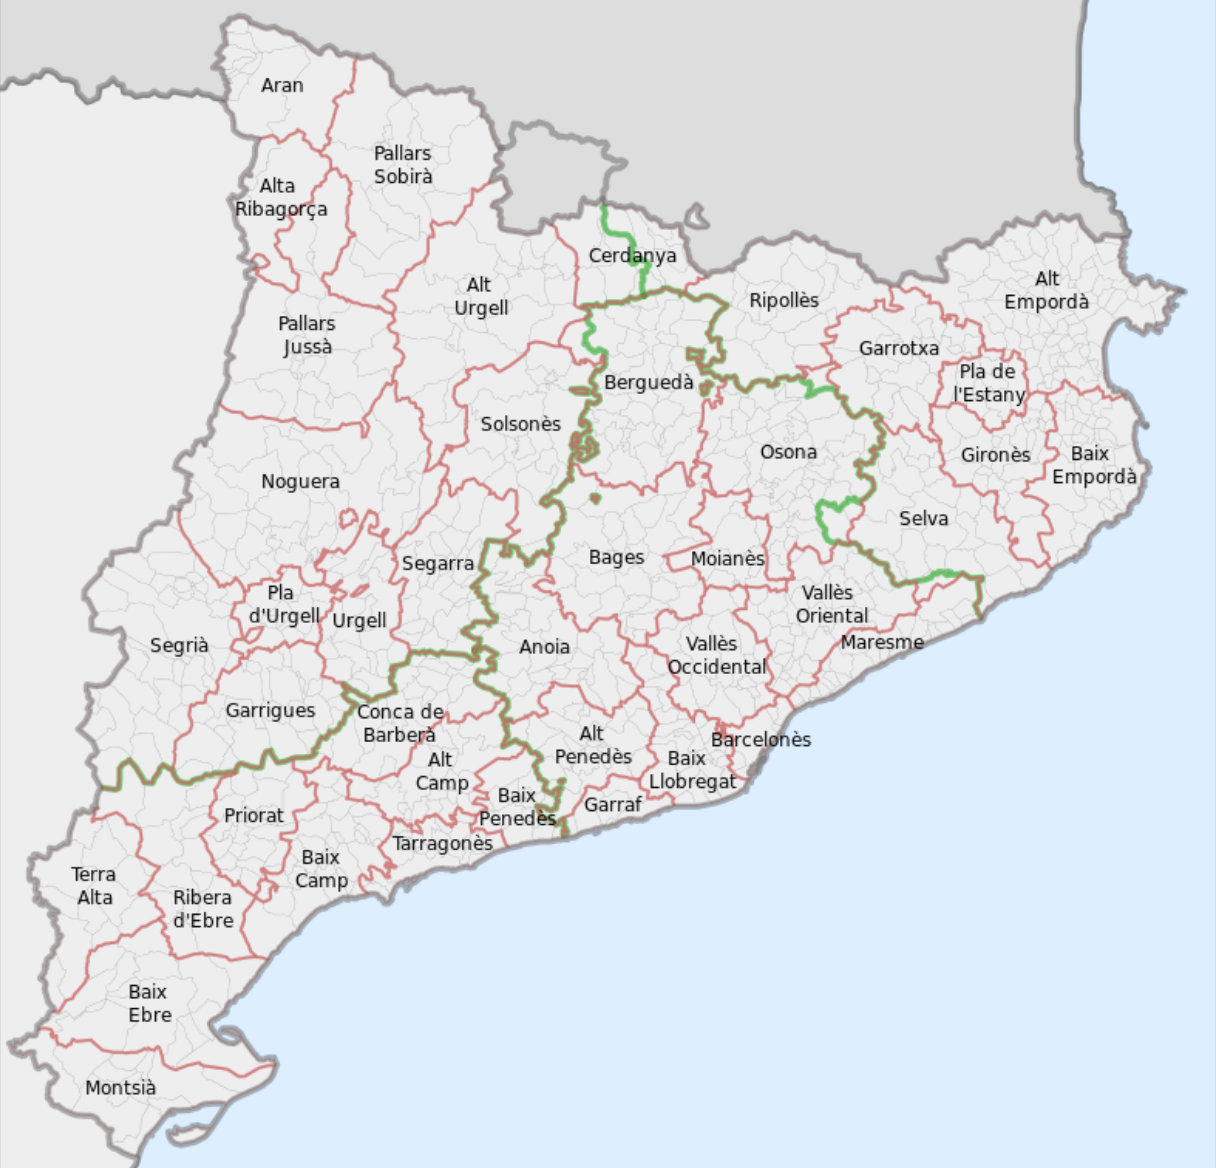 : Named comarcas of Catalonia (2015) Author Rwxrwxrwx. https://commons.wikimedia.org/wiki/File:Comarques_de_Catalunya.svg